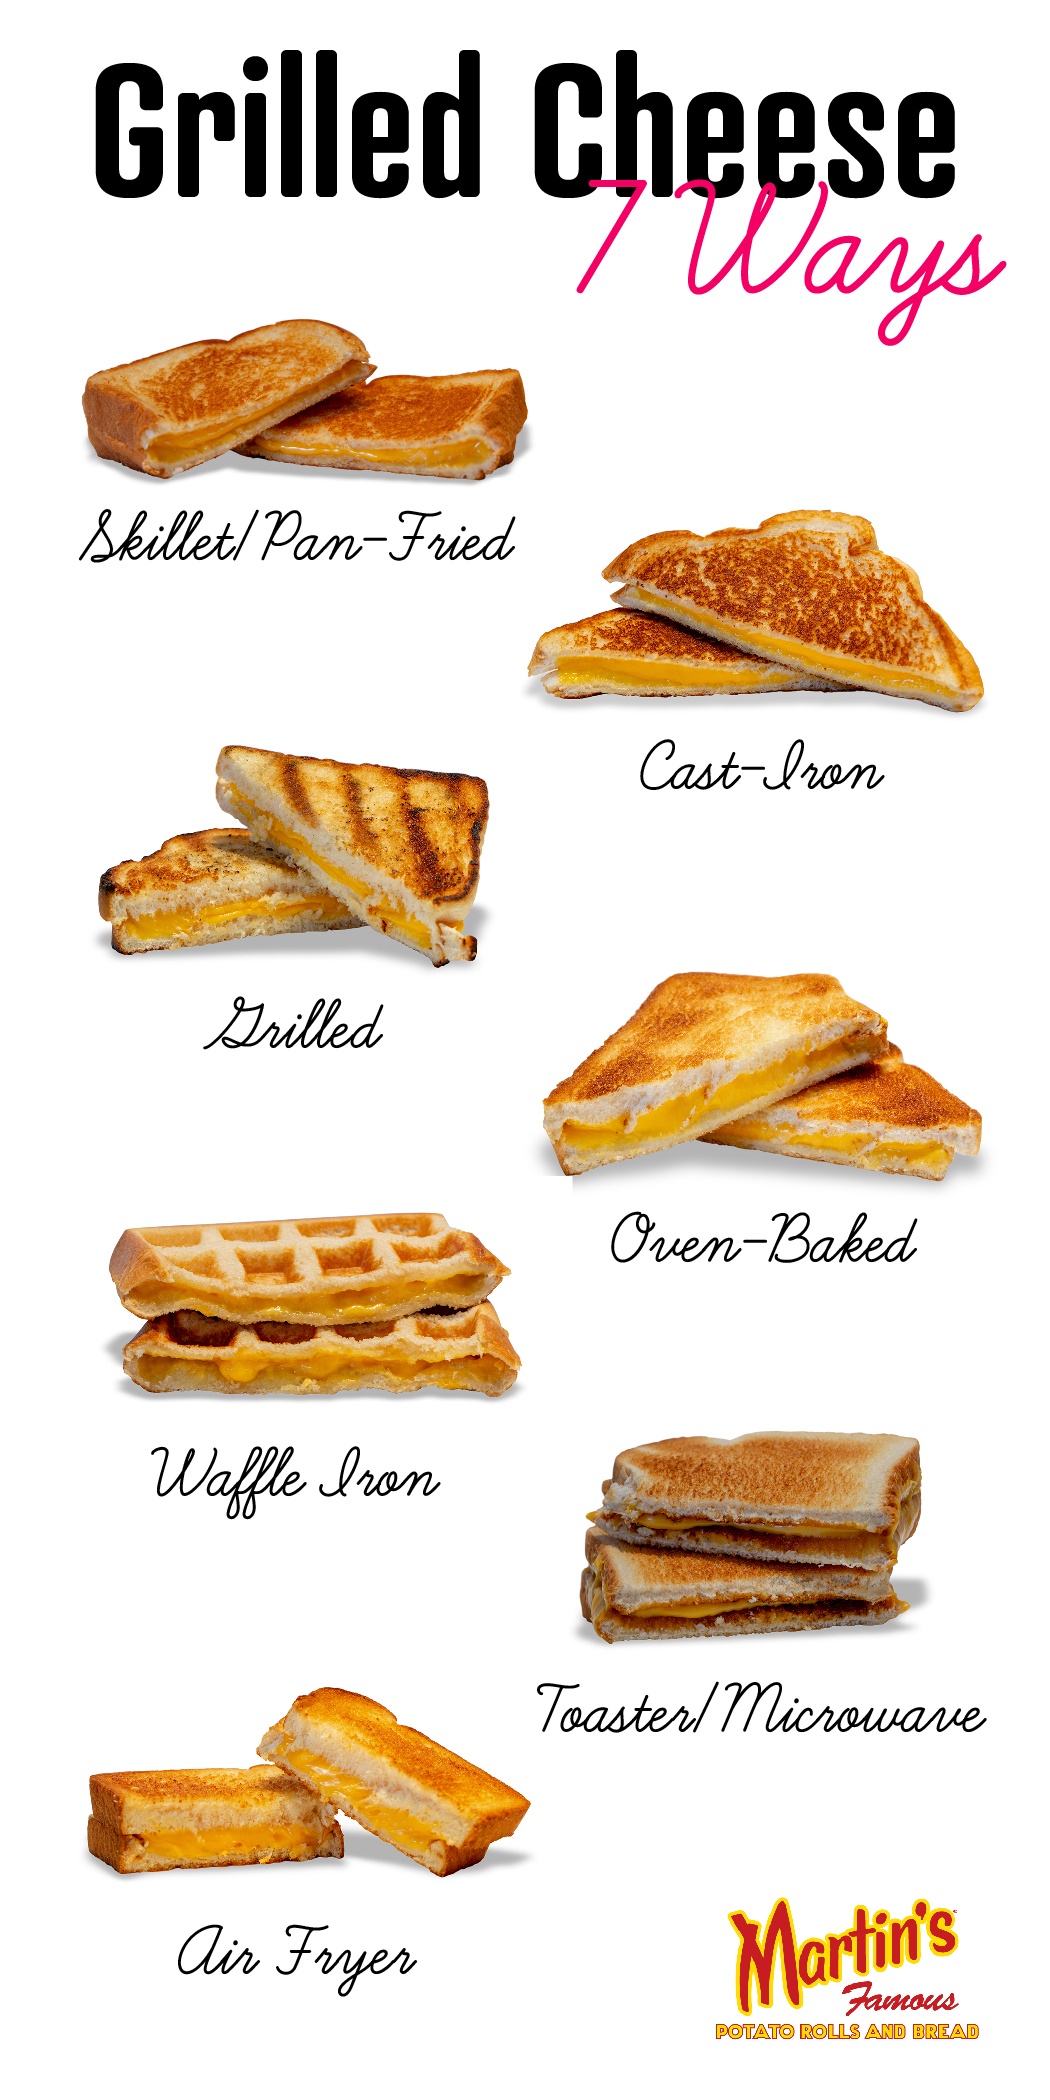 Grilled Cheese 7 Ways - Infographic